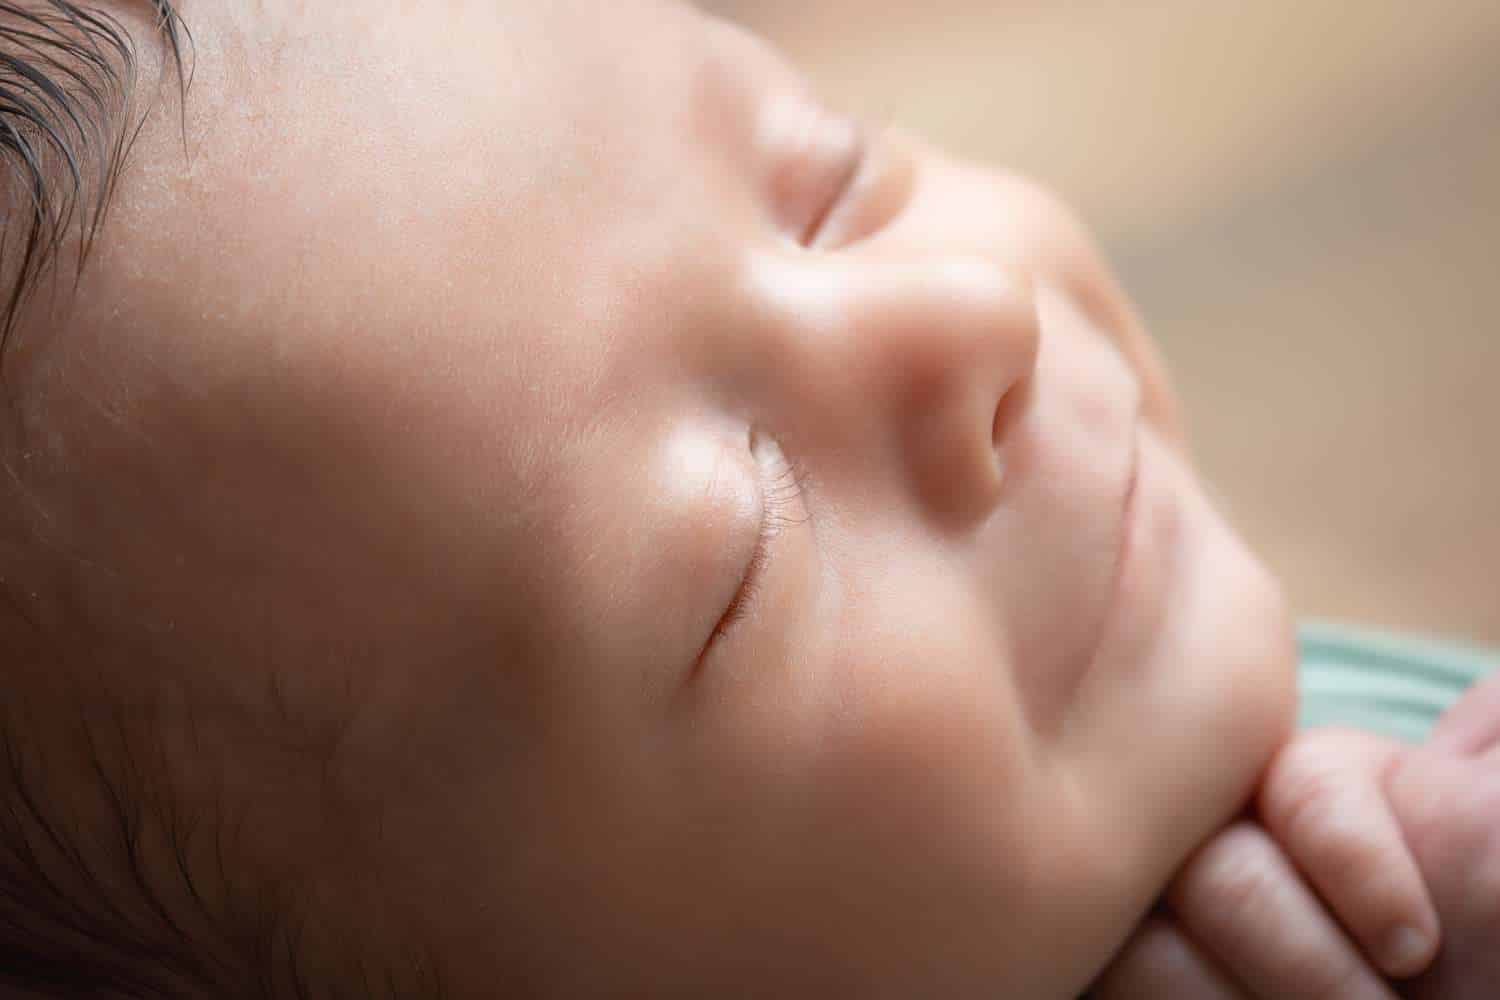 newborn photographer in rochester ny captures macros image of newborn baby boy's eyelashes and smile 